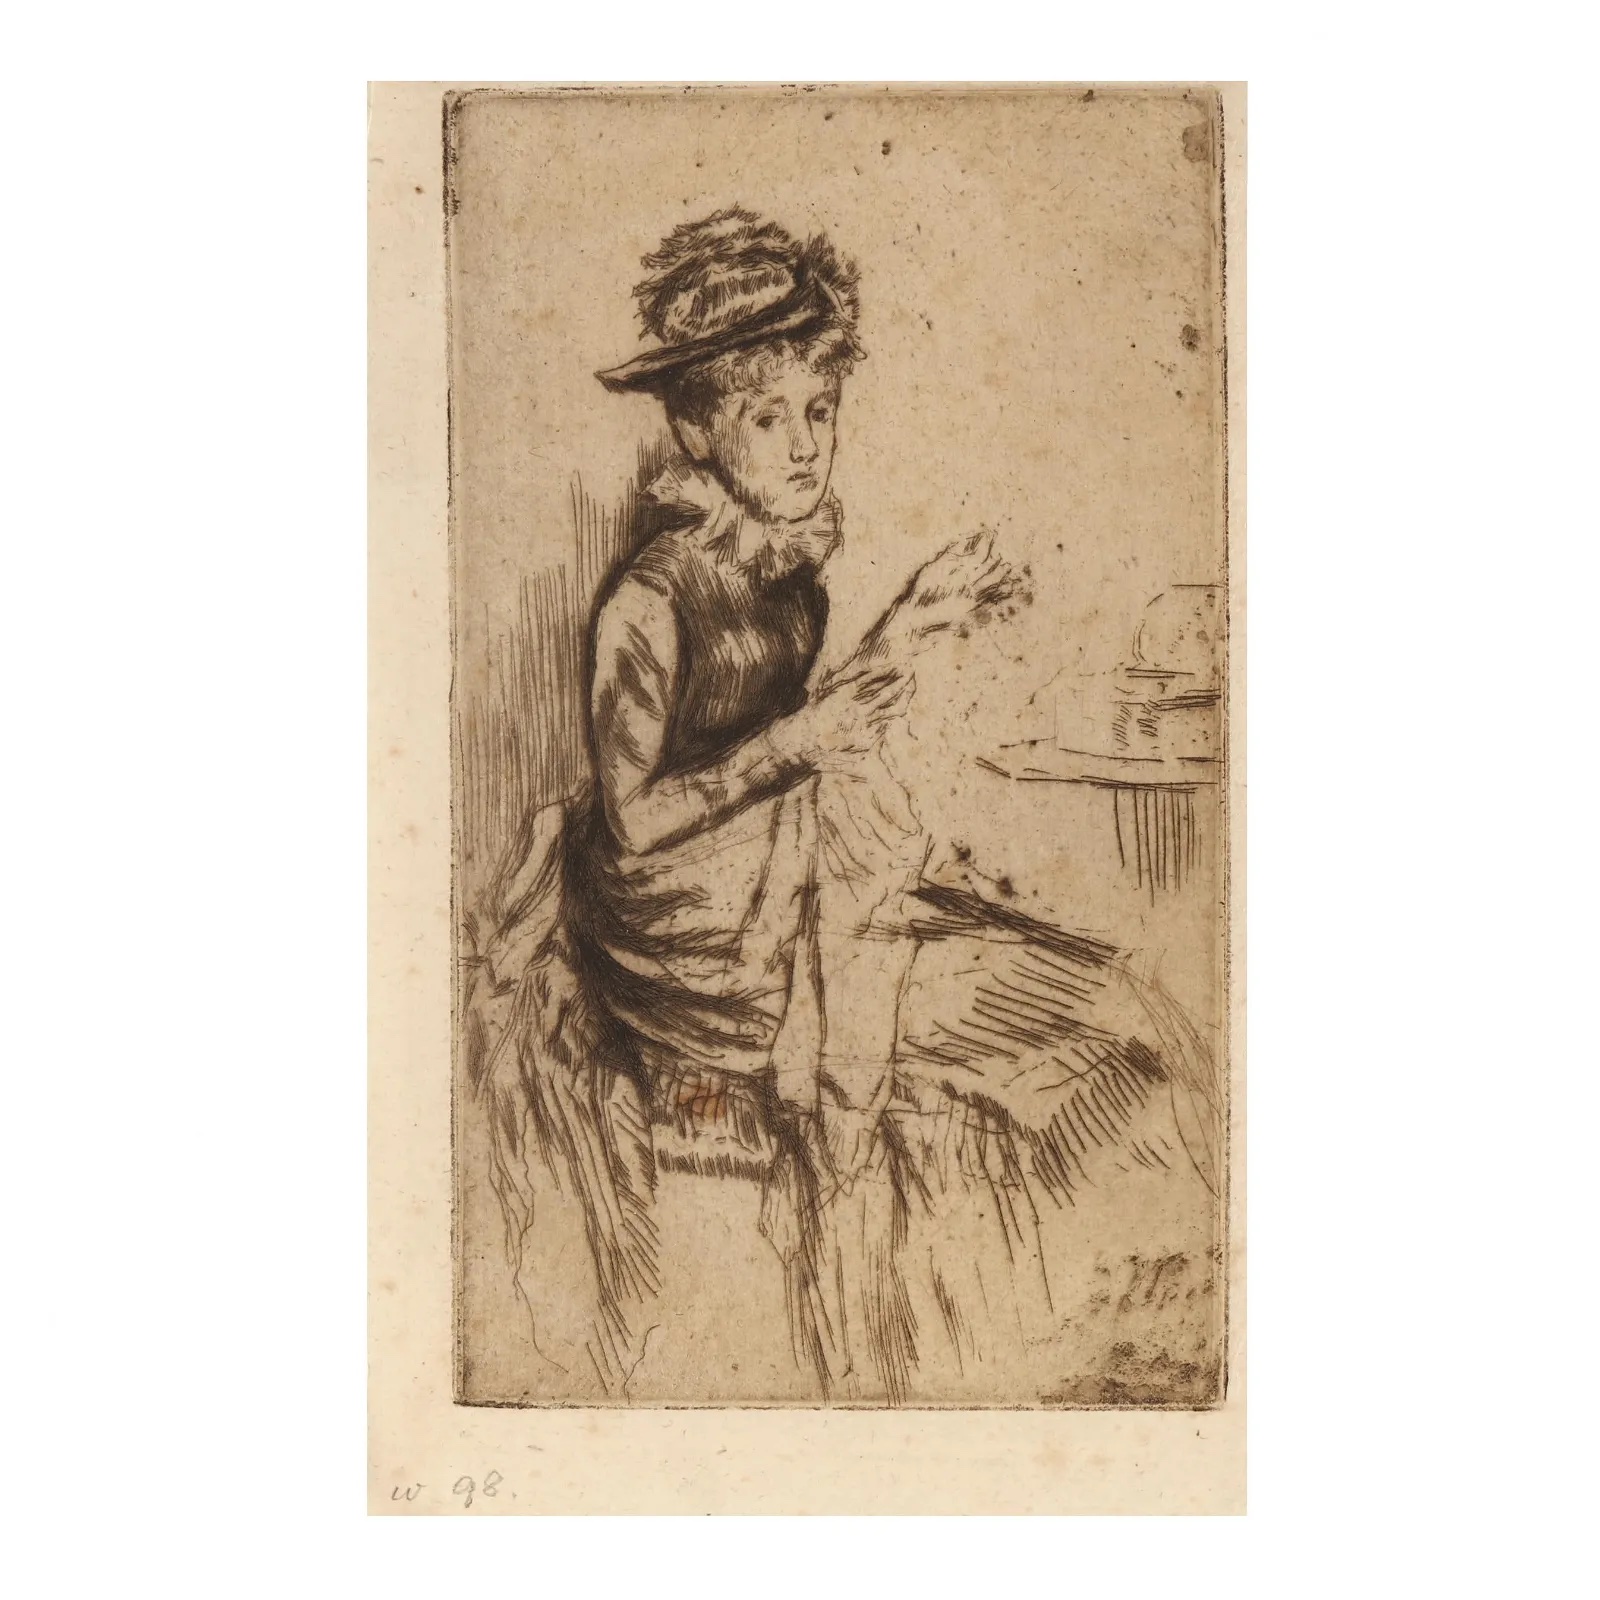 'Tatting,' an 1873 etching and drypoint by James Abbott McNeill Whistler, estimated at $50-$25,000 at Leland Little.